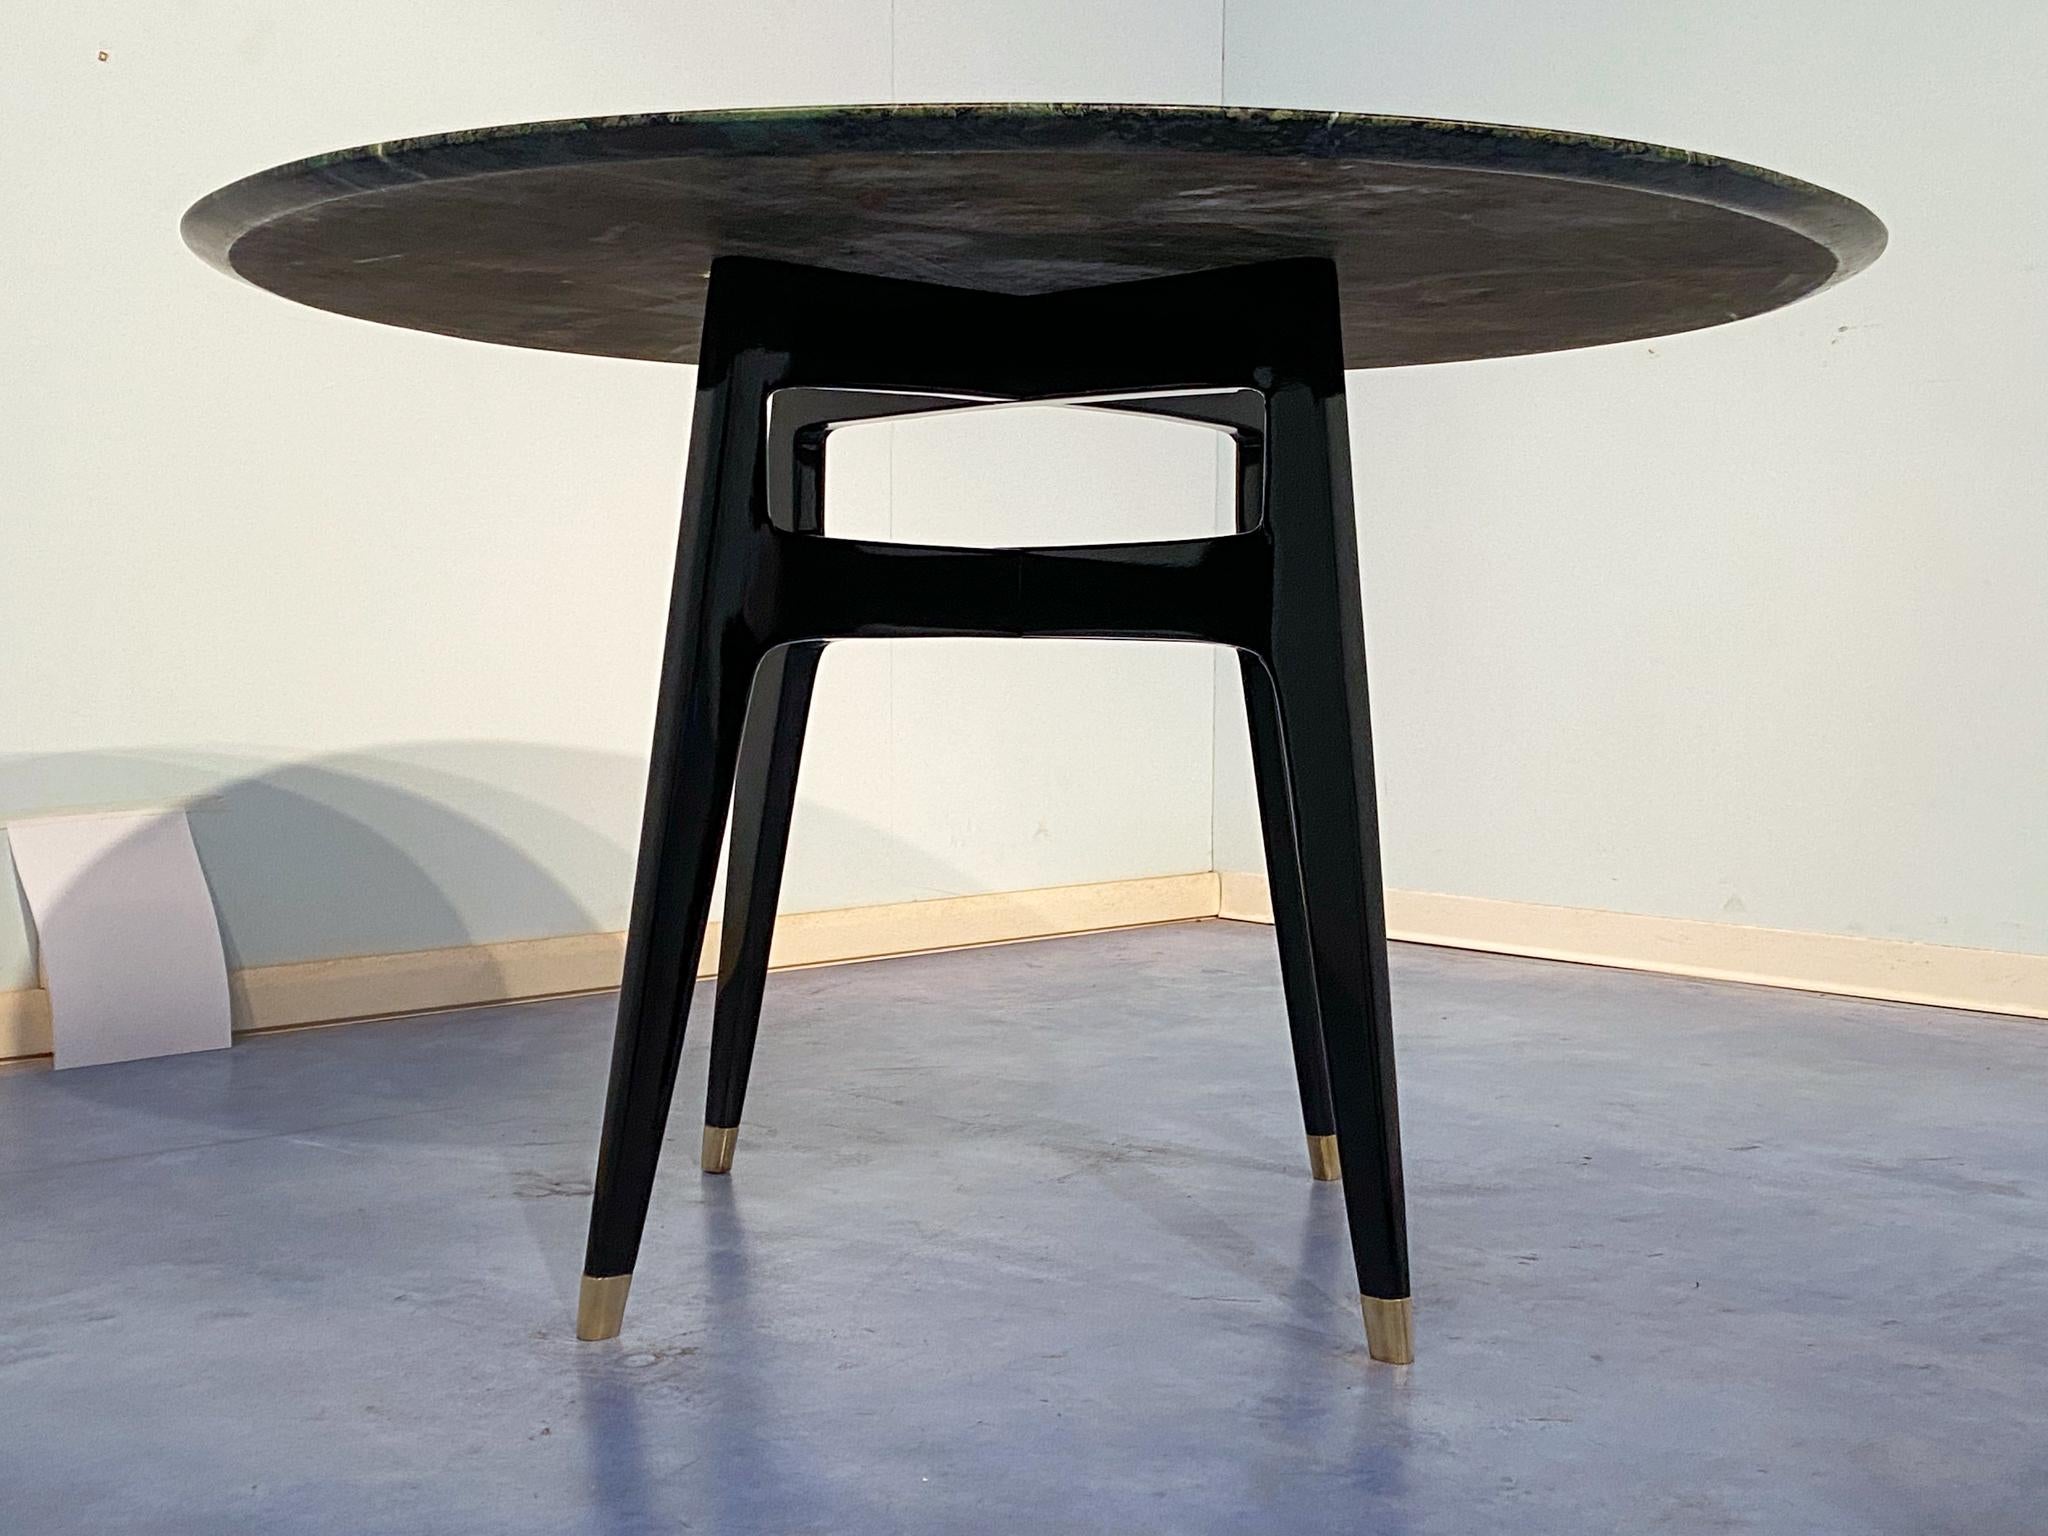 Italian Mid-Century  Marble Round Support or Center Table, by  Dassi 1950s For Sale 6